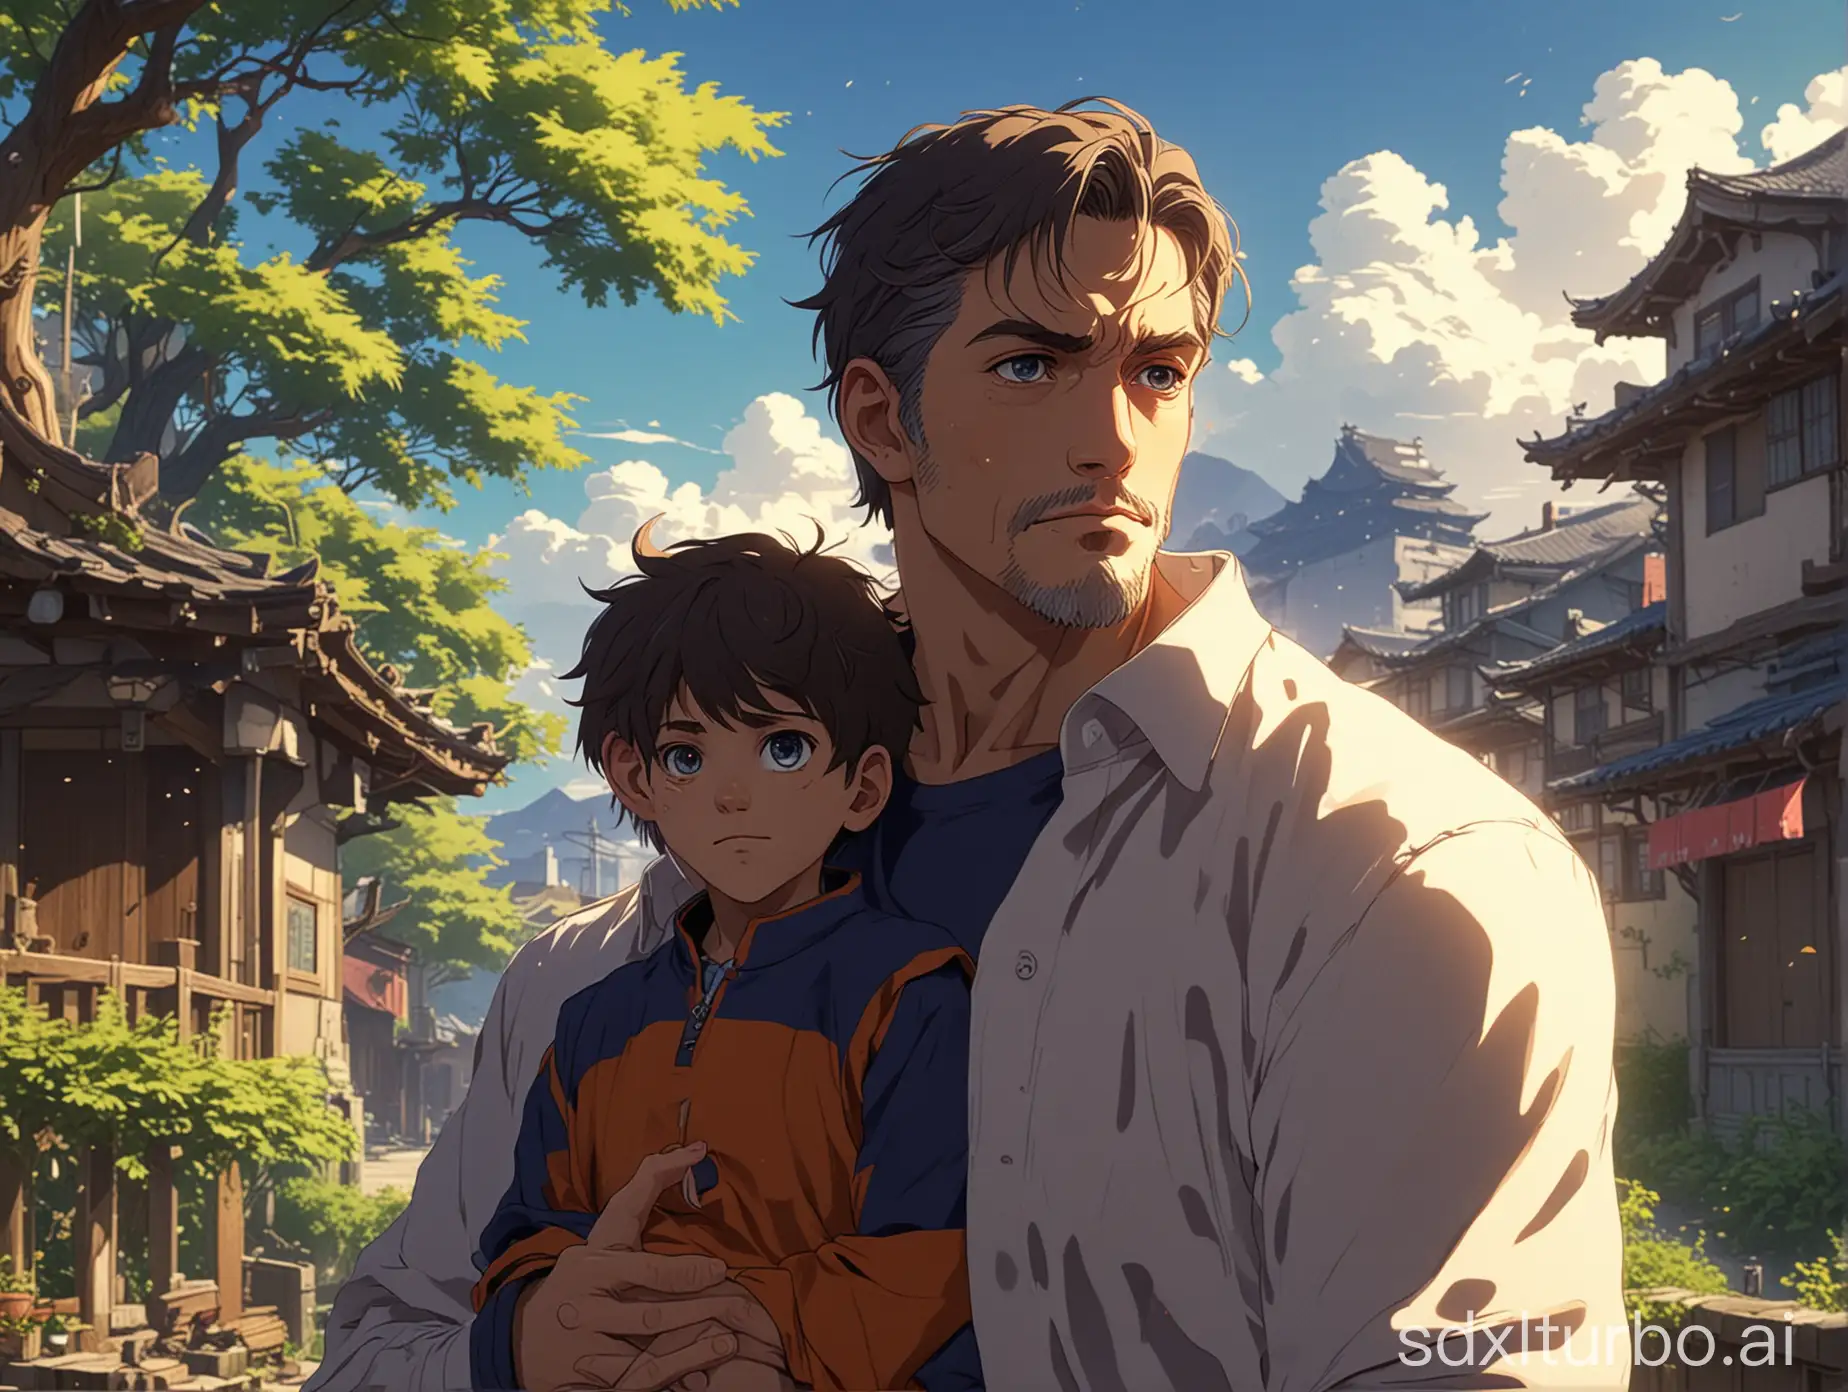 father and son, high-end, anime style, colorful character image, high-definition image, rich in detail, movie-like feeling